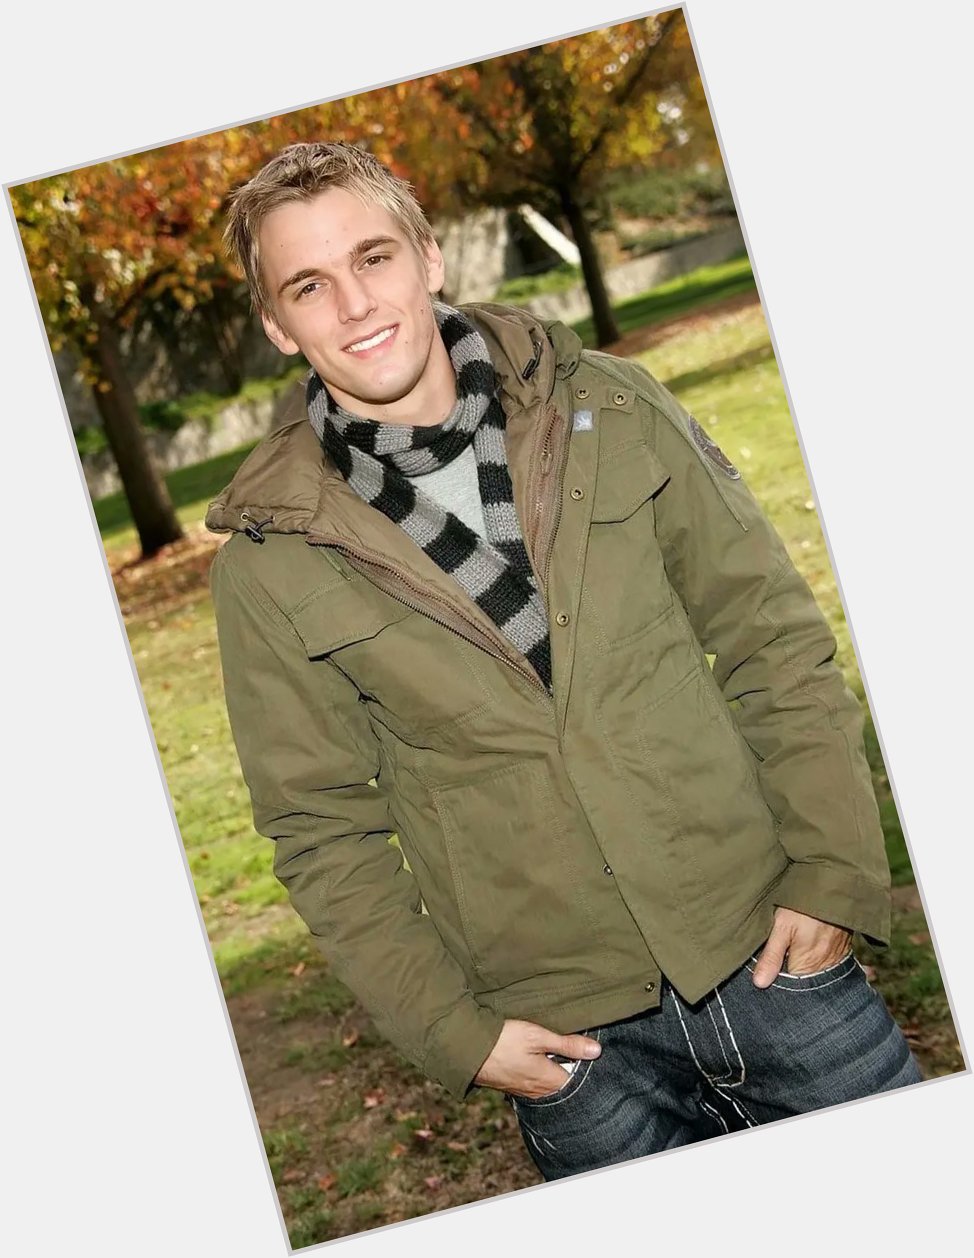 Happy 35th Birthday to Aaron Carter!! 